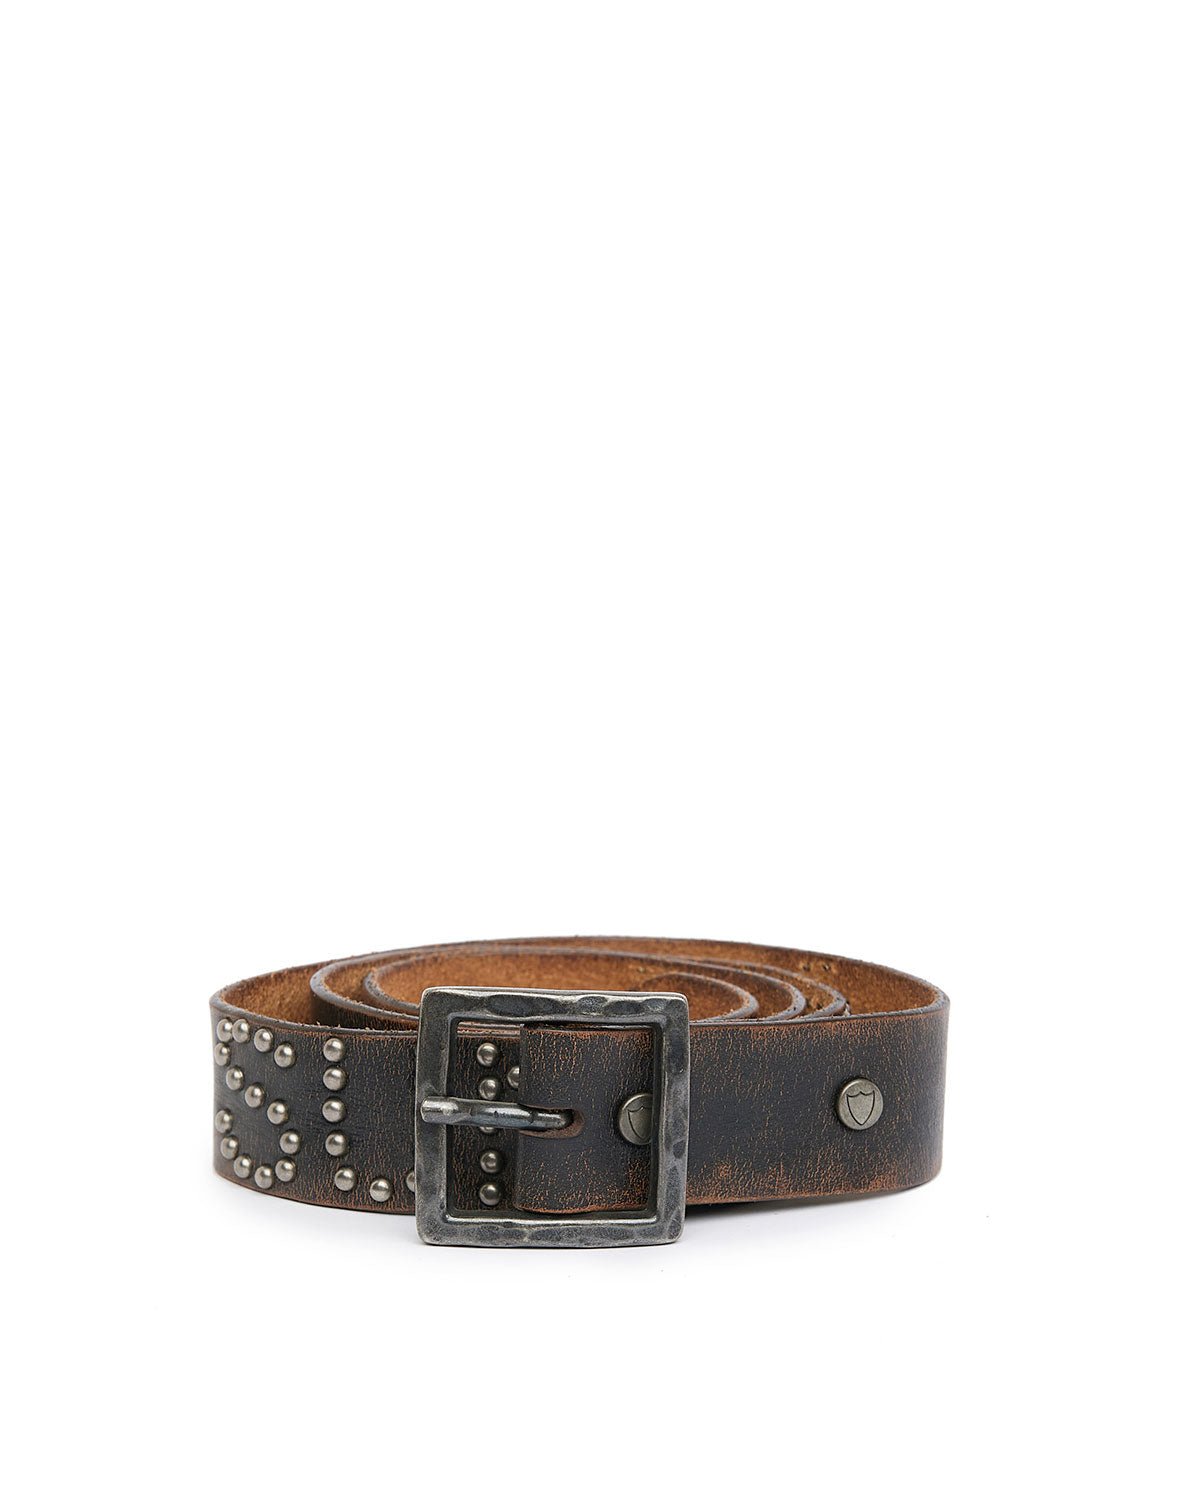 SUNSET BLV BELT Brown leather belt with studs, rhinestones and studded 'SUNSET BLV' writing. Brass buckle. Height: 3,5 cm. HTC LOS ANGELES